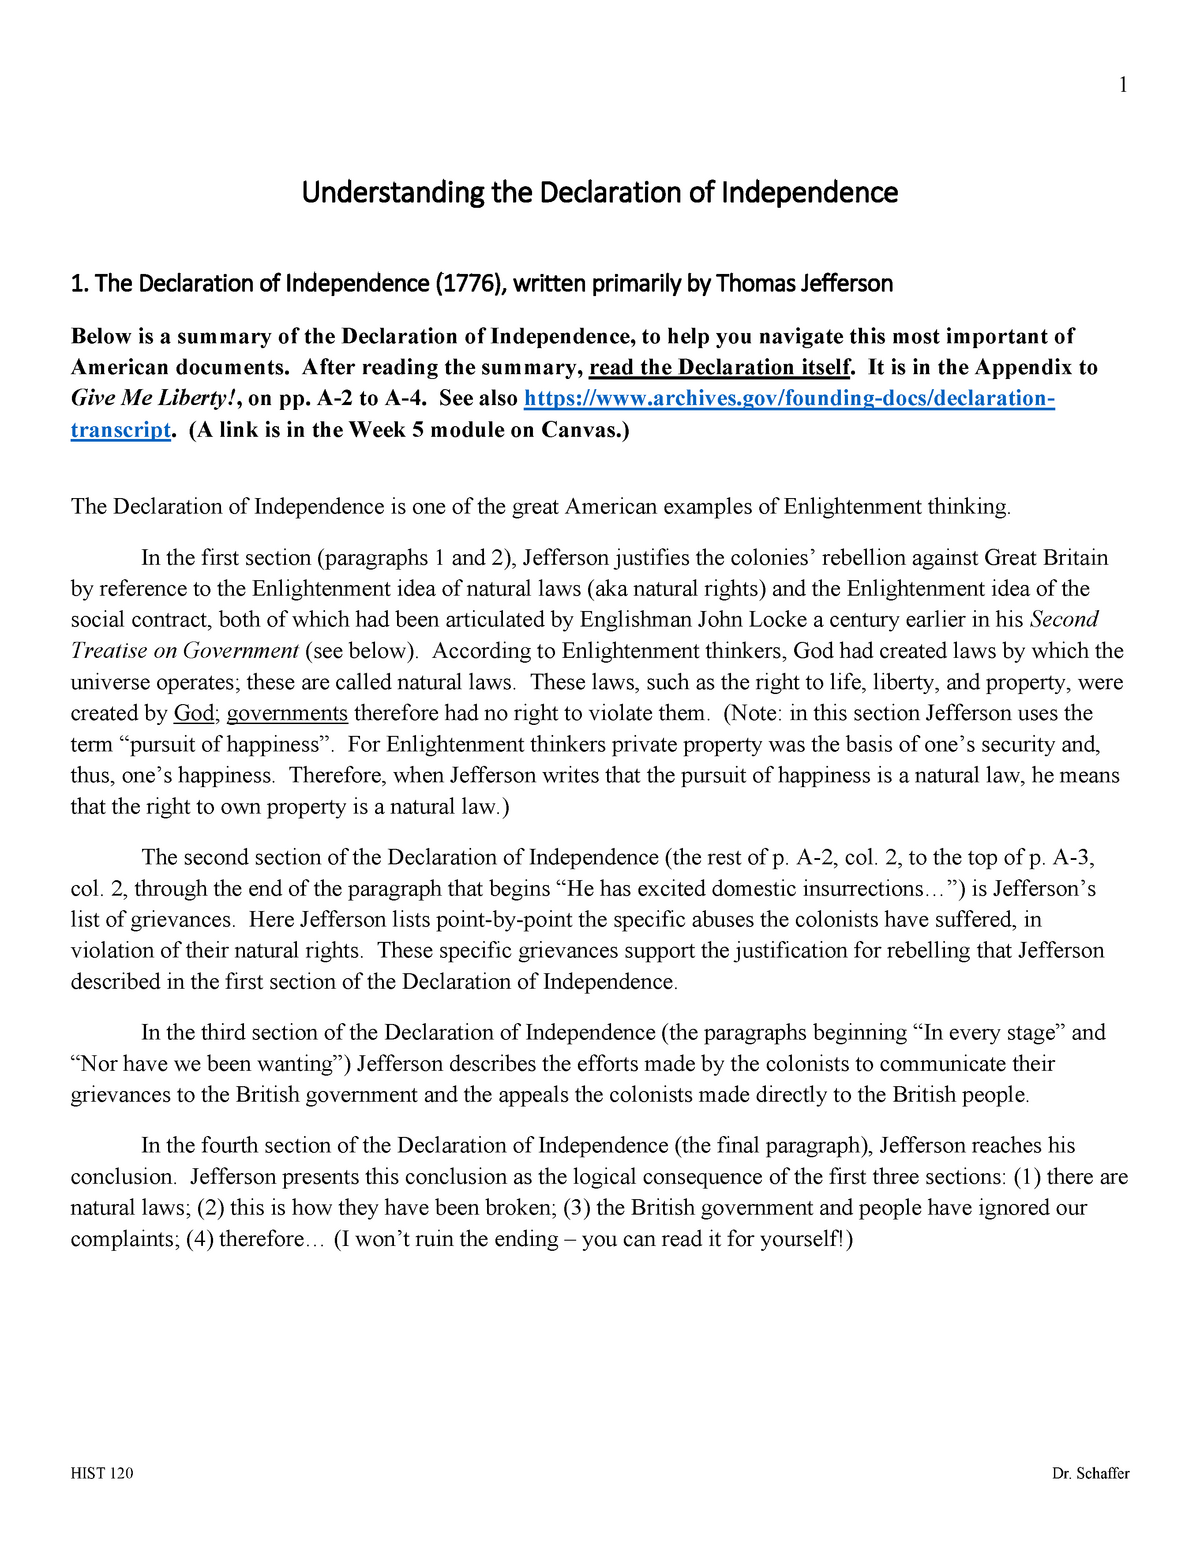 Understanding the Declaration of Independence - 22 HIST 2220 Dr With Declaration Of Independence Worksheet Answers